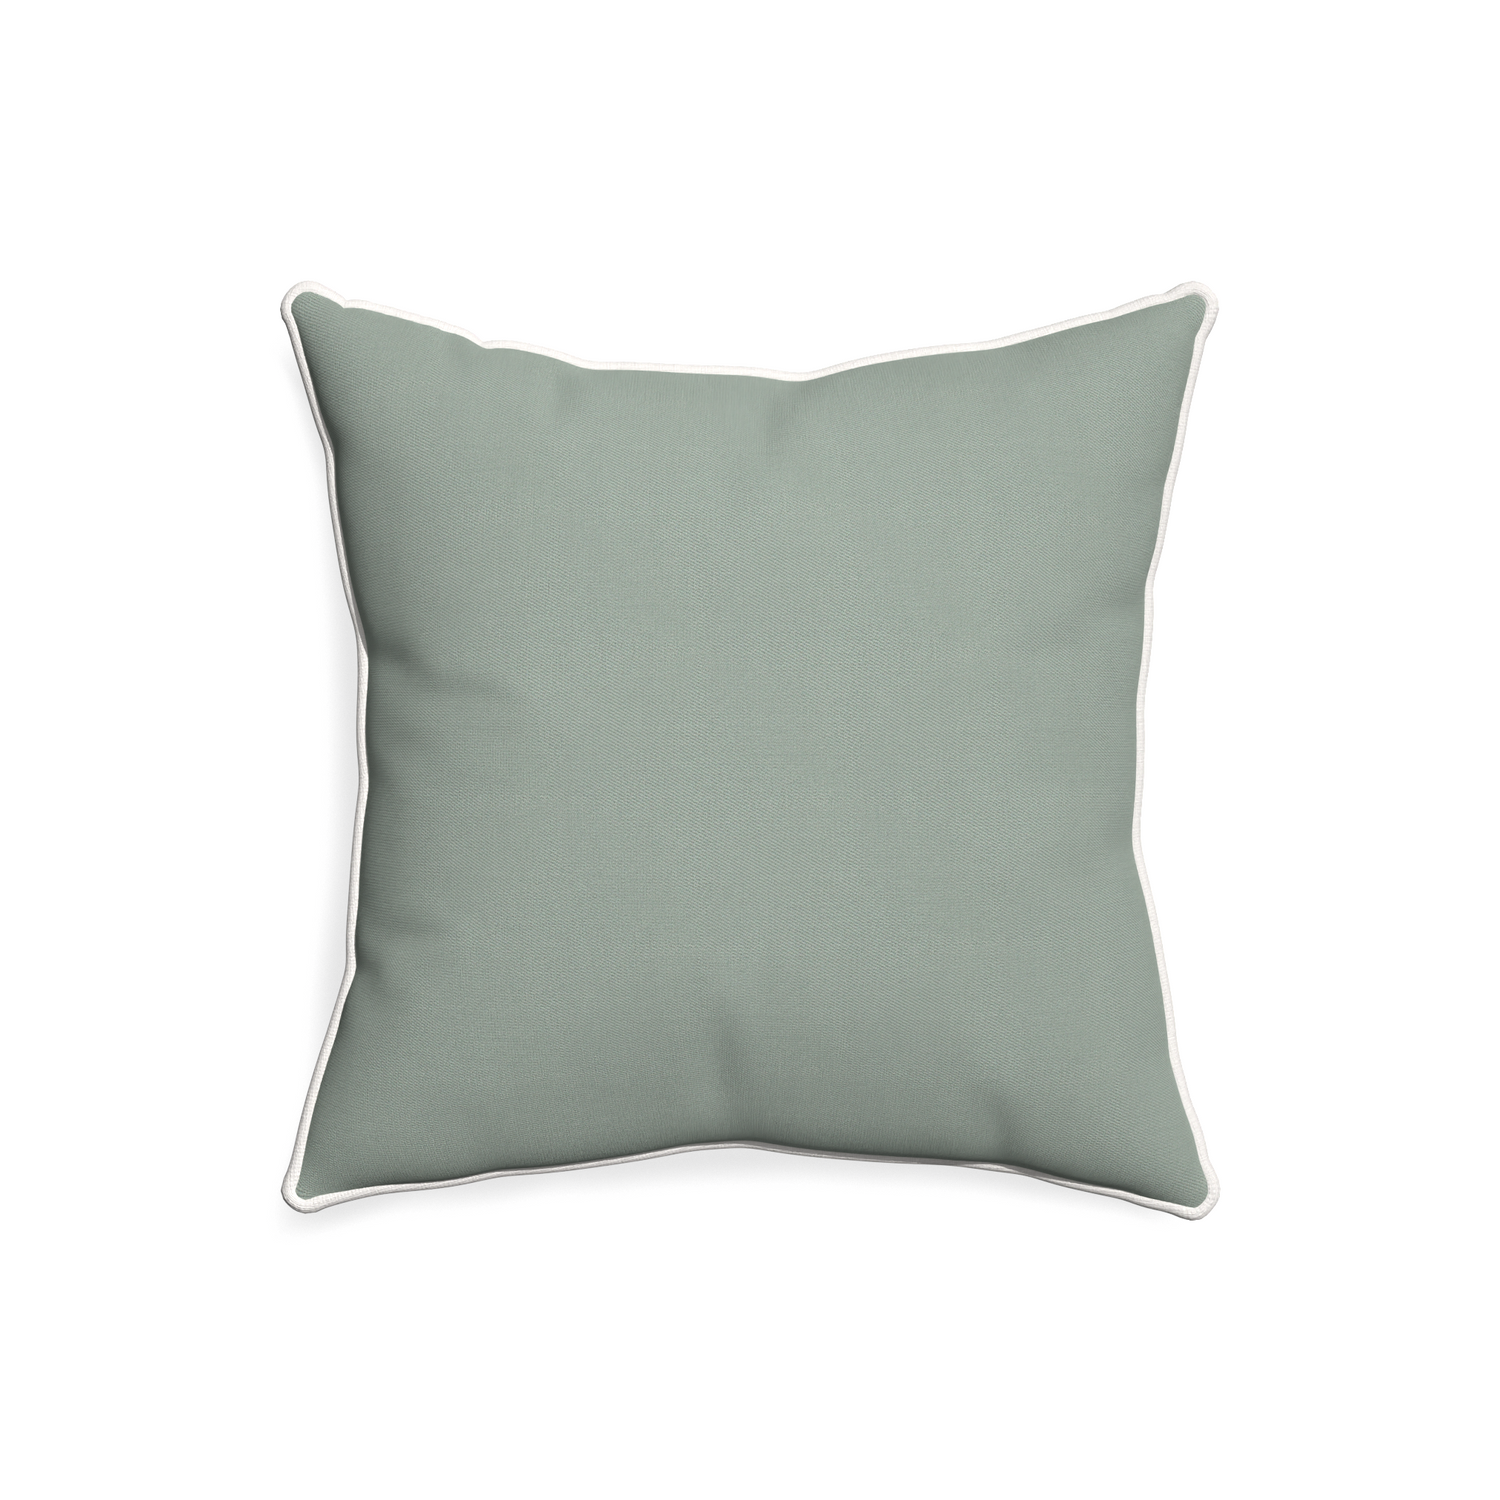 20-square sage custom pillow with snow piping on white background